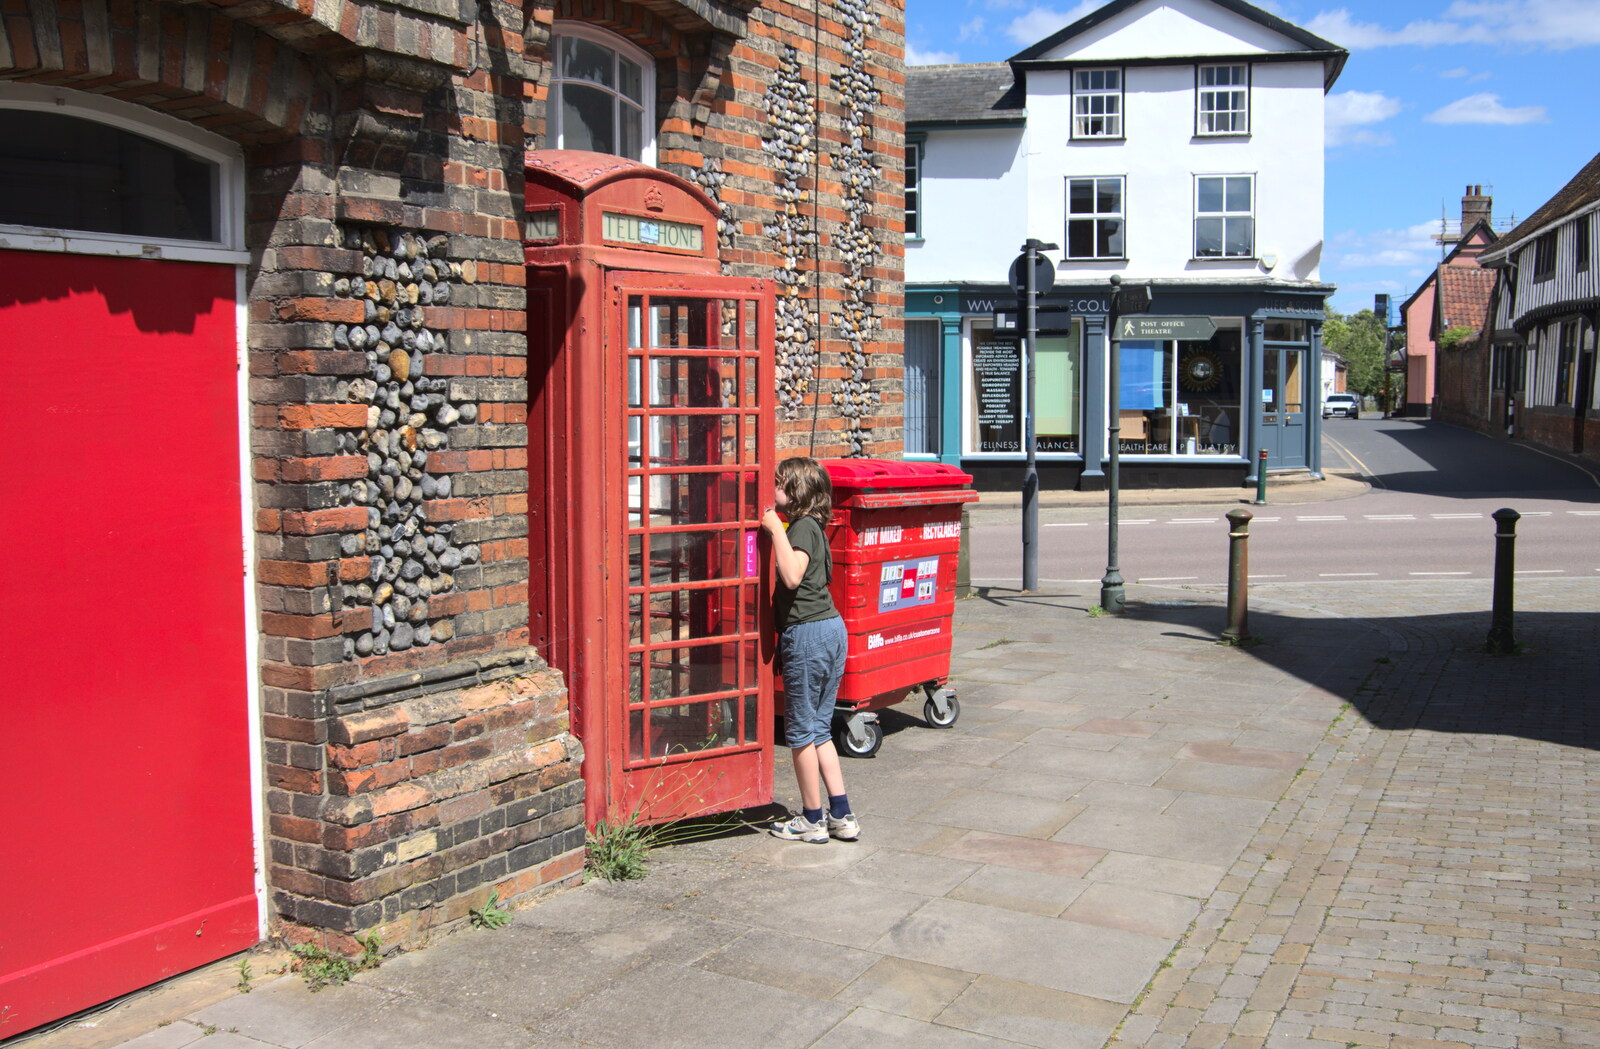 The K6 phone box by the town hall from A Walk Around Abbey Bridges, Eye, Suffolk - 5th July 2020